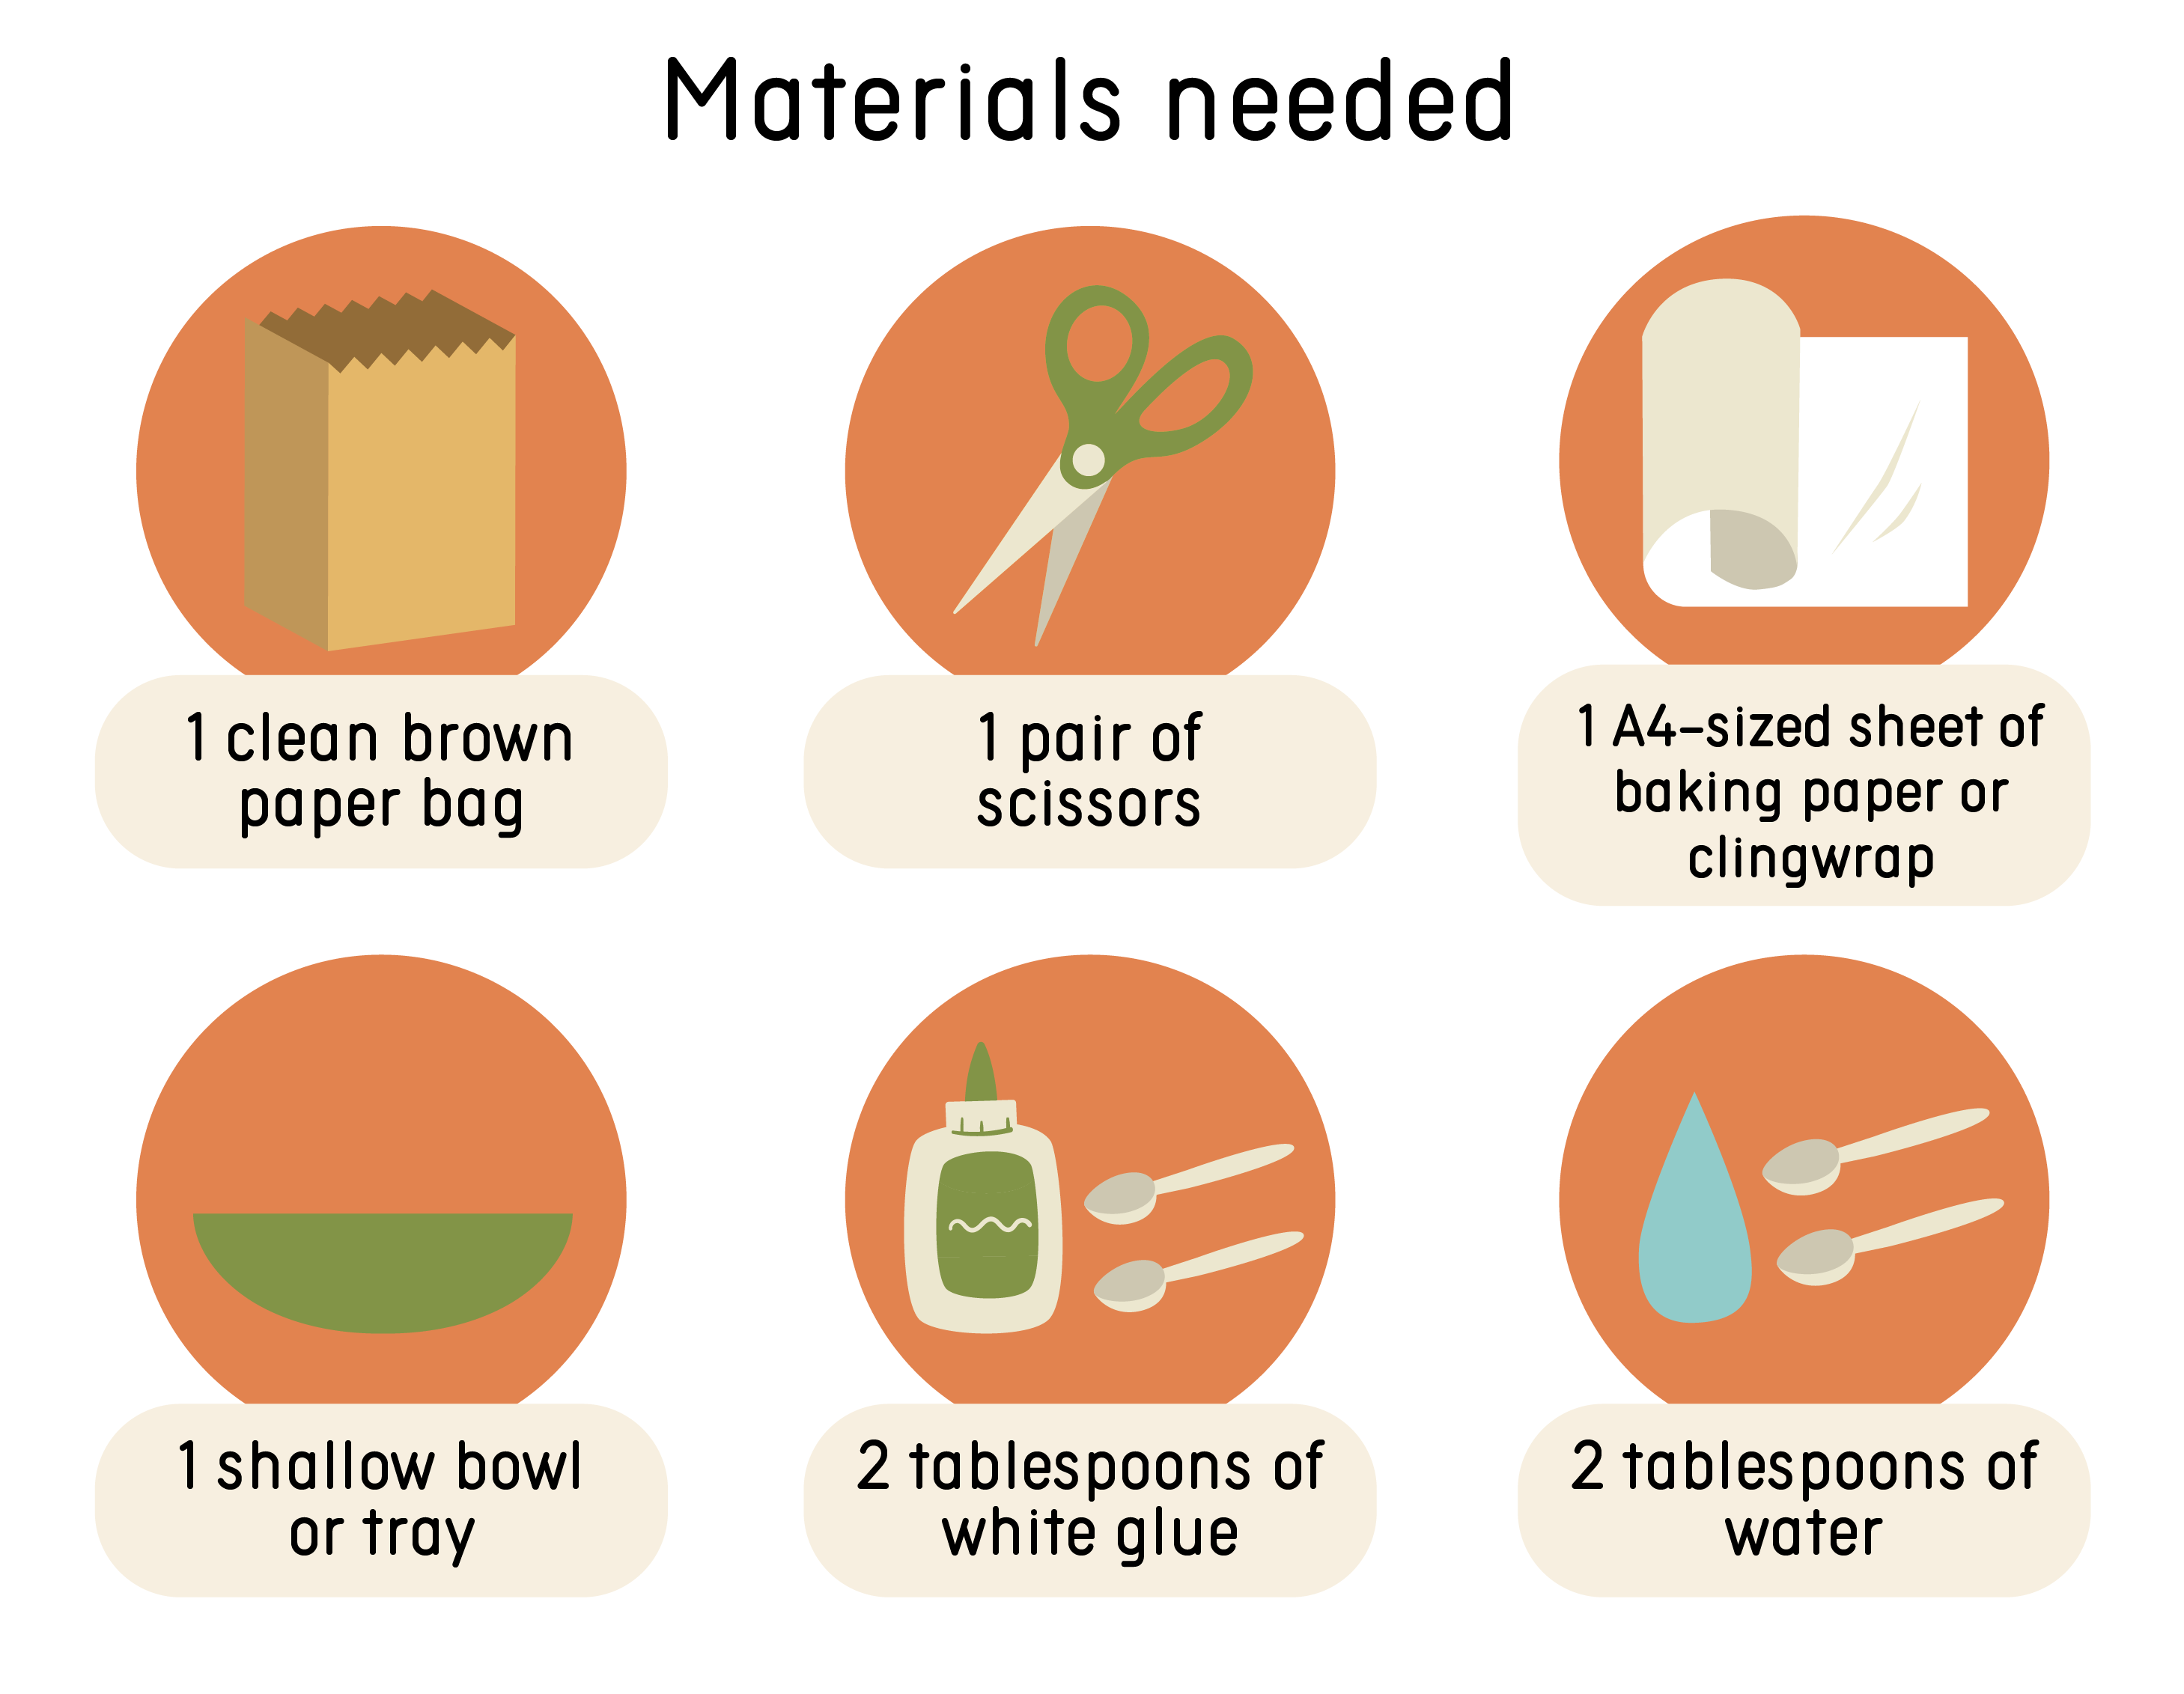 1 clean brown paper bag, 1 A4-sized sheet of baking paper or clingwrap, 1 pair of scissors, 1 shallow bowl or tray, 2 tablespoons of white glue, 2 tablespoons of water